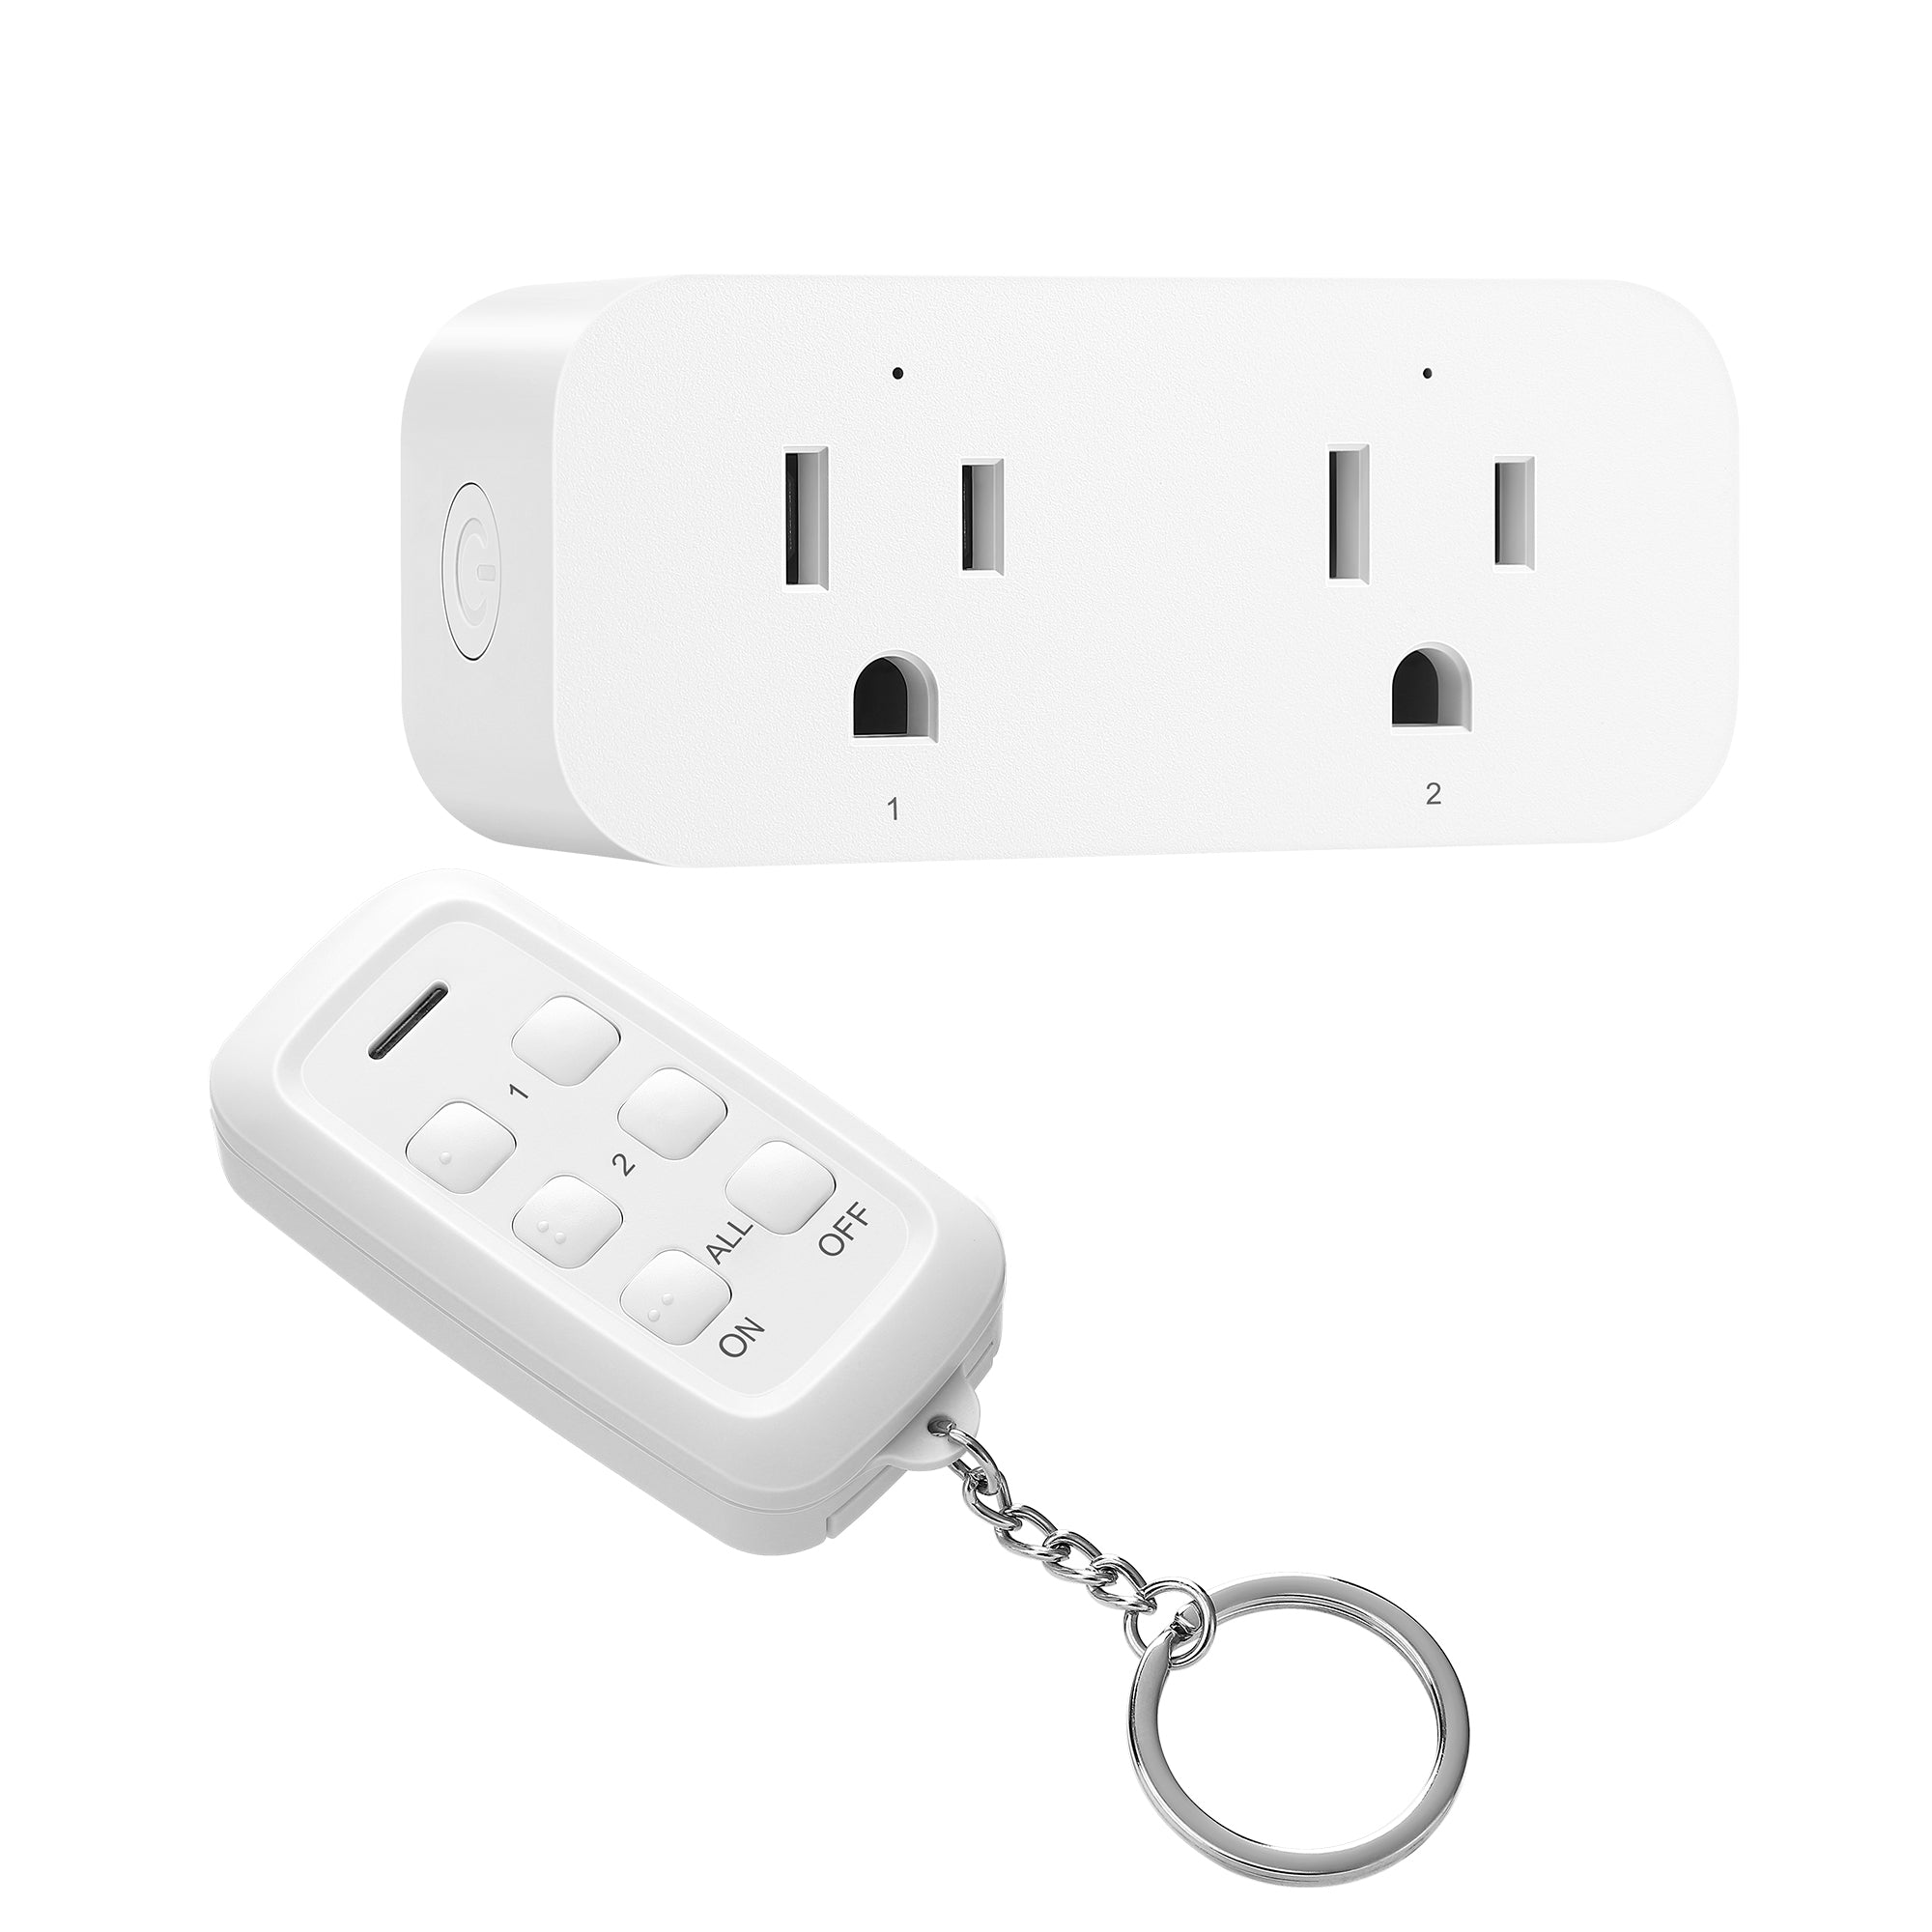 DEWENWILS Outdoor Remote Control Outlet with 2 Remotes Power Strip